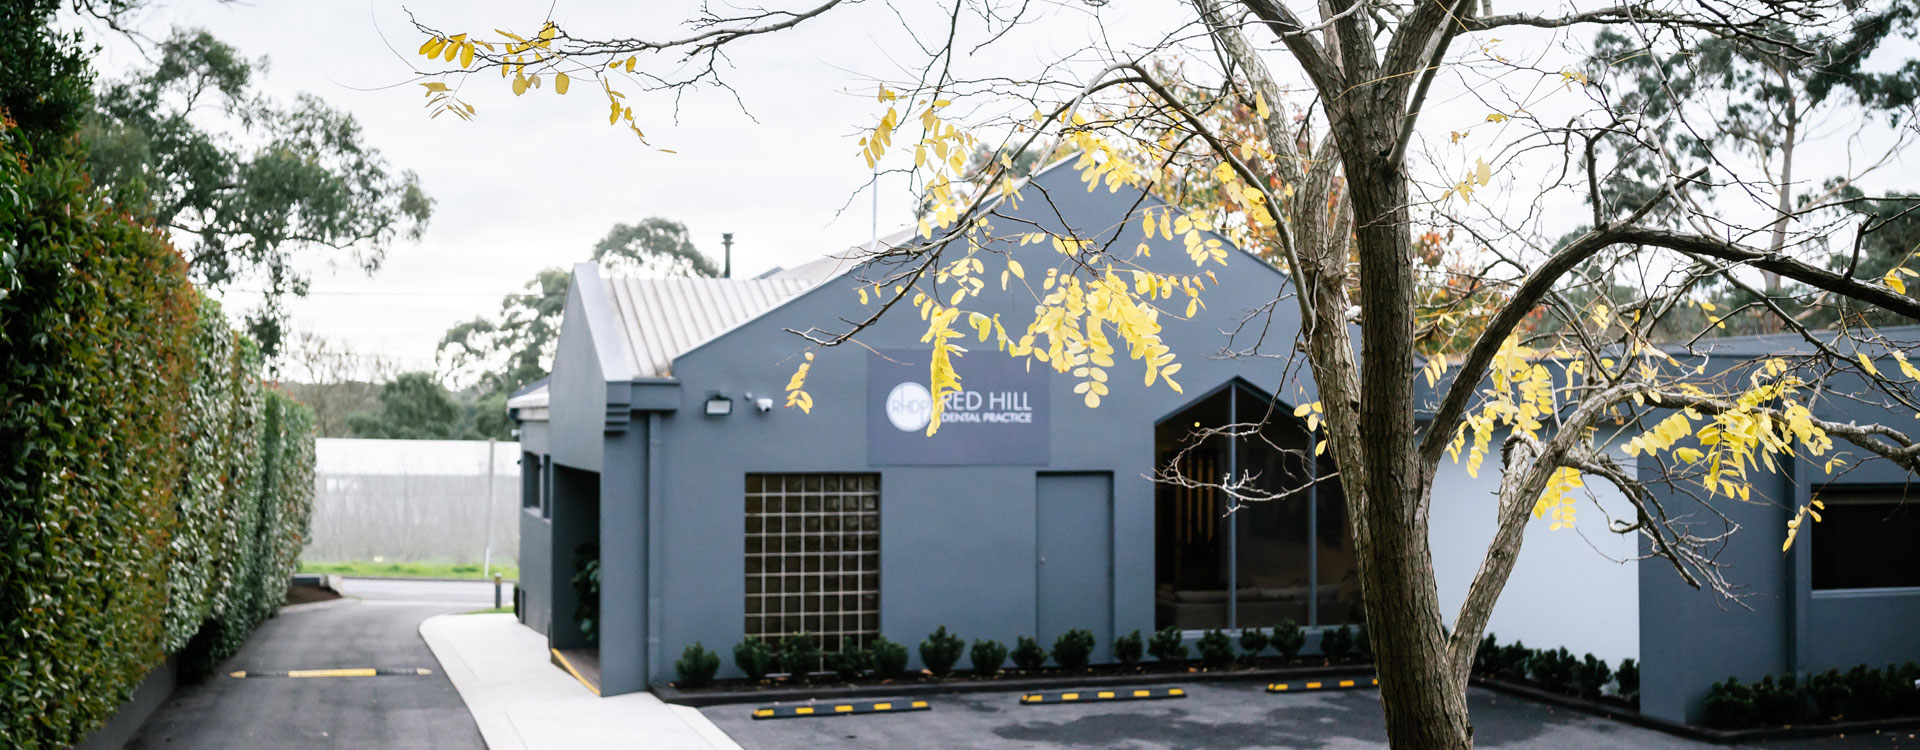 Red Hill Dental Practice Building